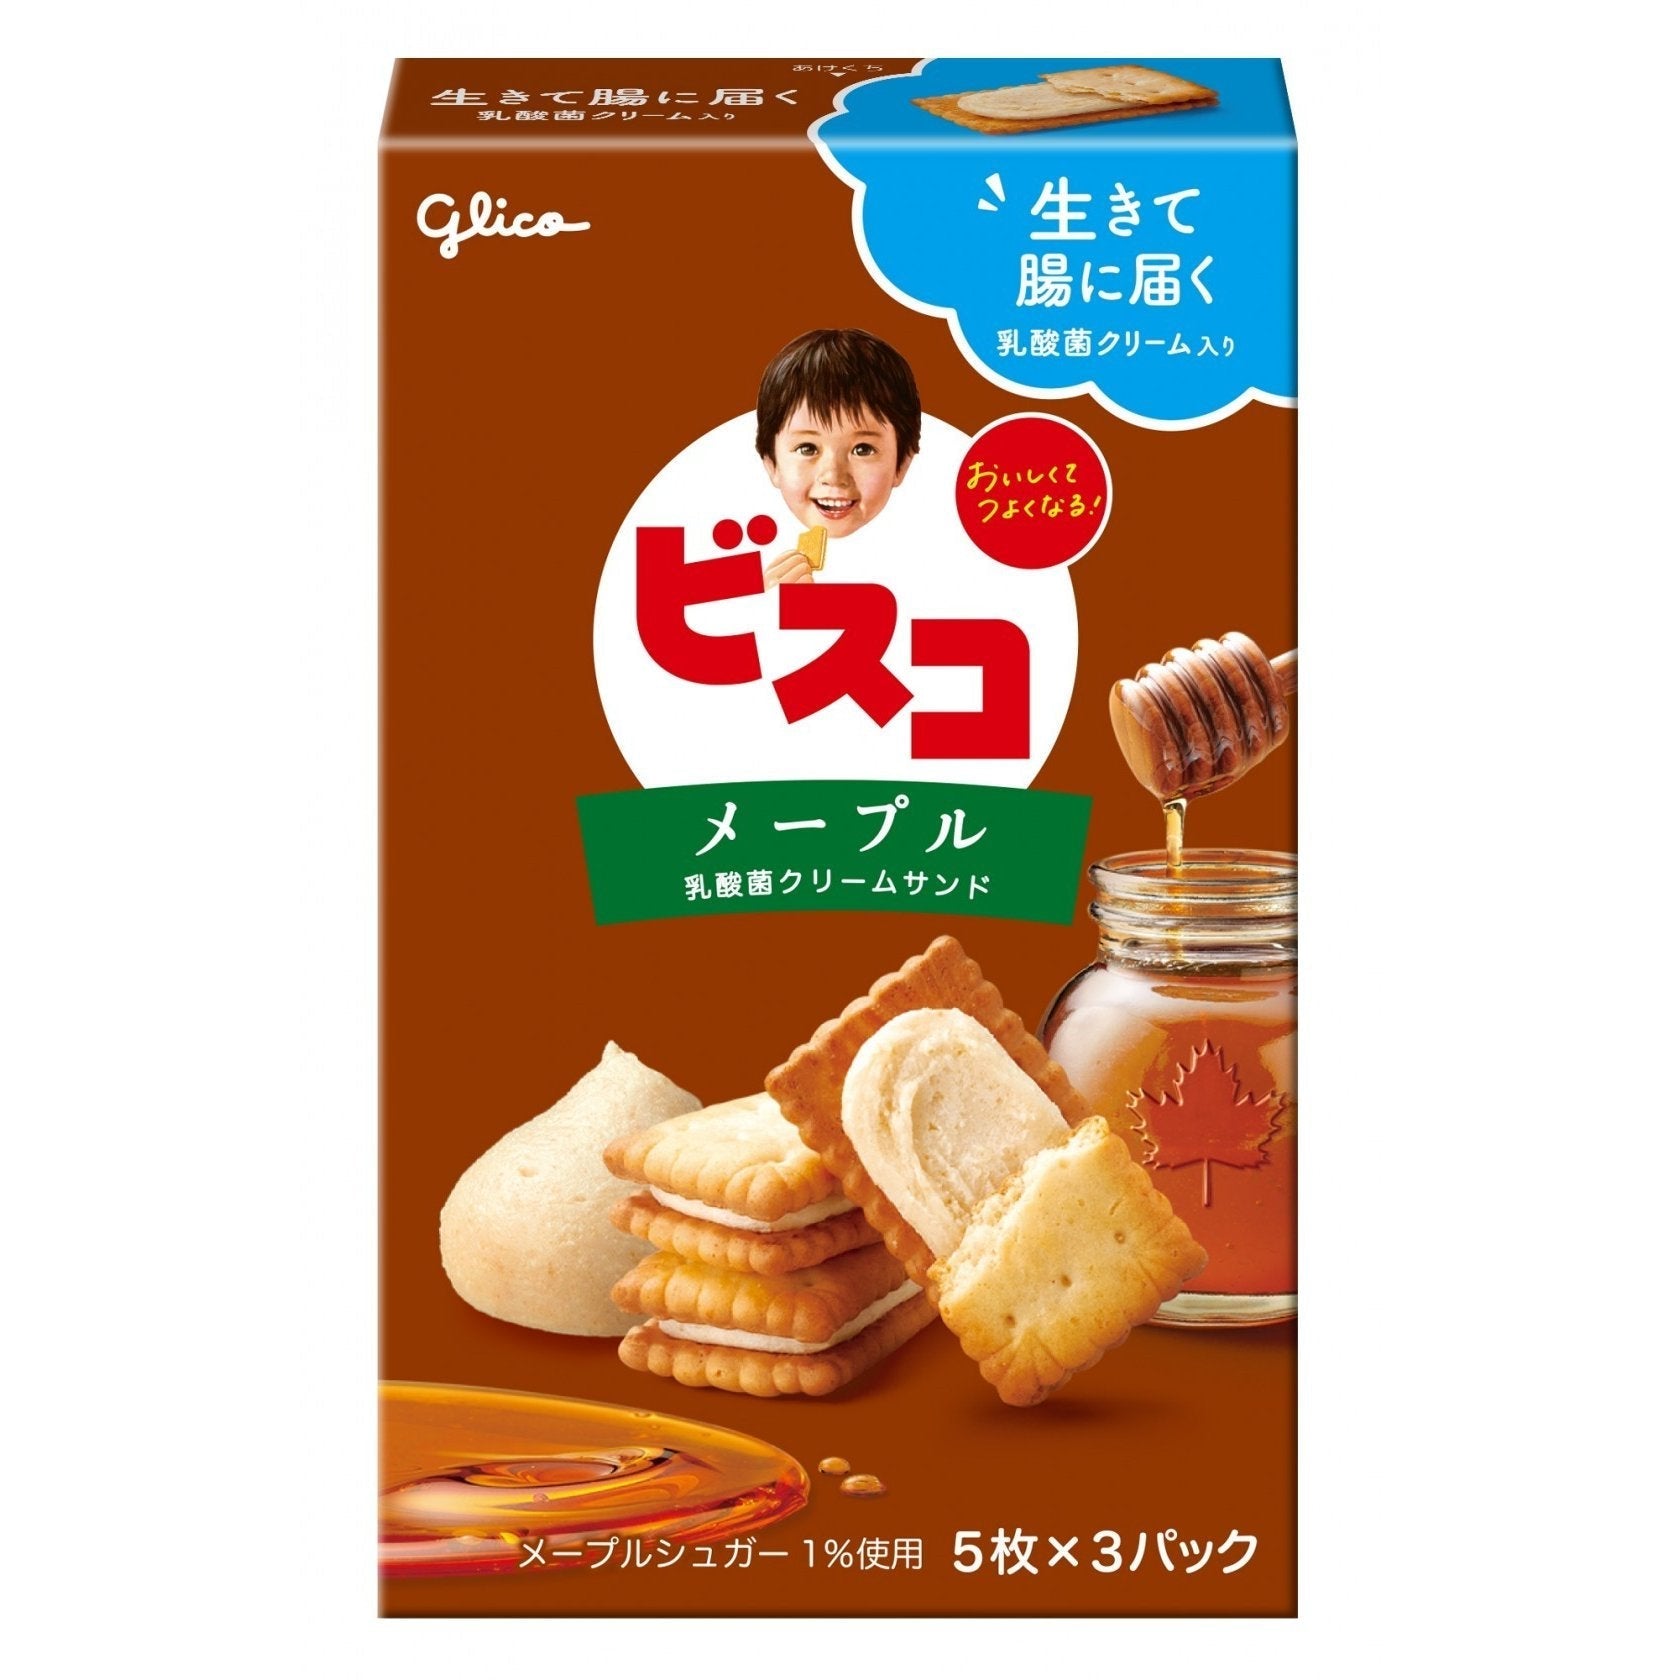 Glico Bisco Maple Syrup Flavored Cream Sandwich Biscuits 15 Pieces (Pack of 5)